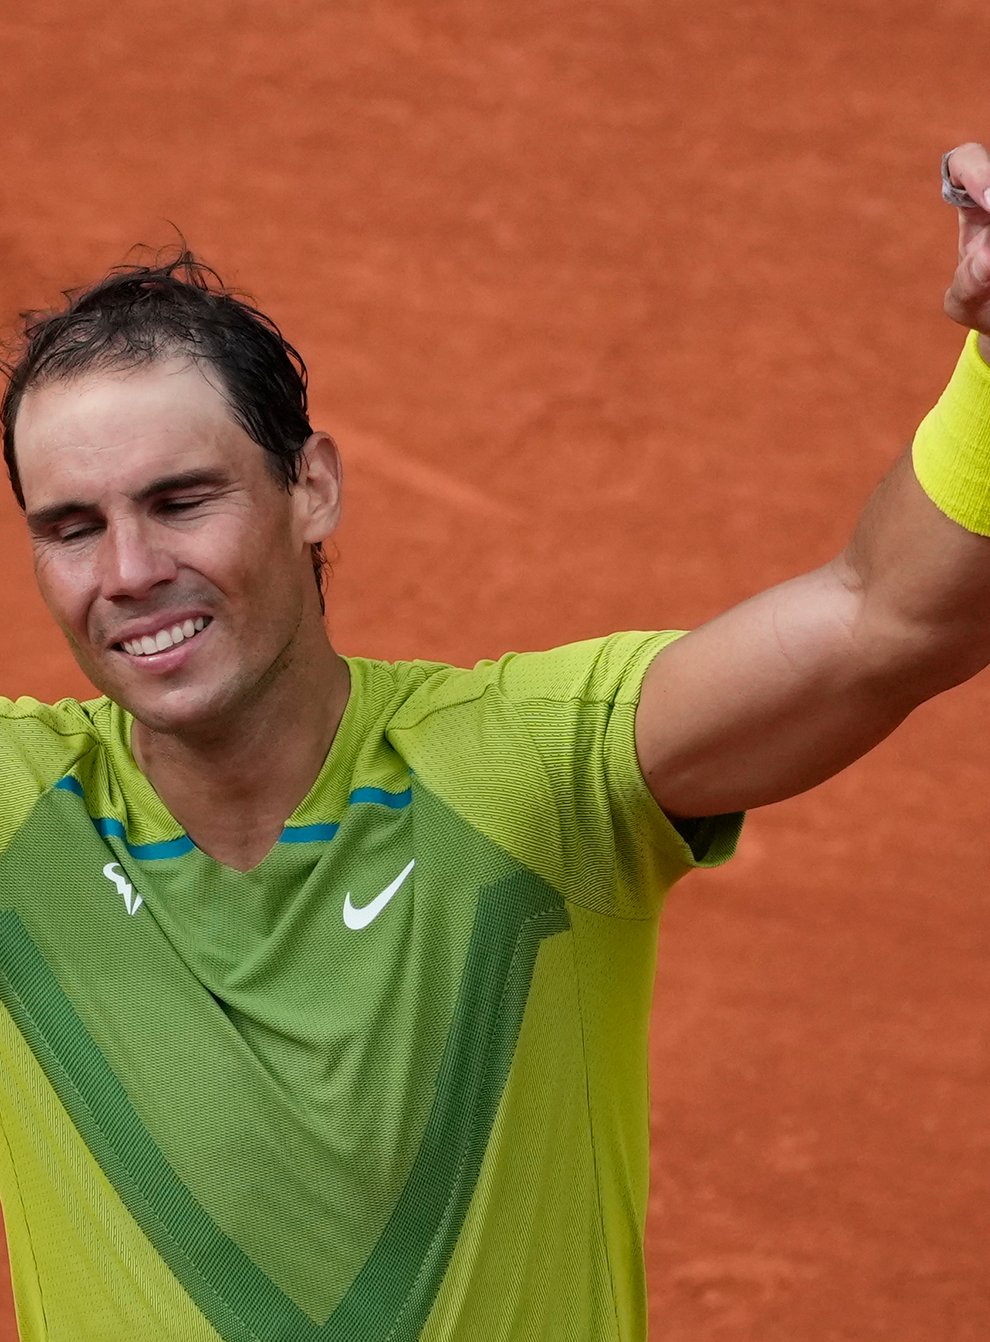 Rafael Nadal claimed French Open title number 14 (Christophe Ena/AP)